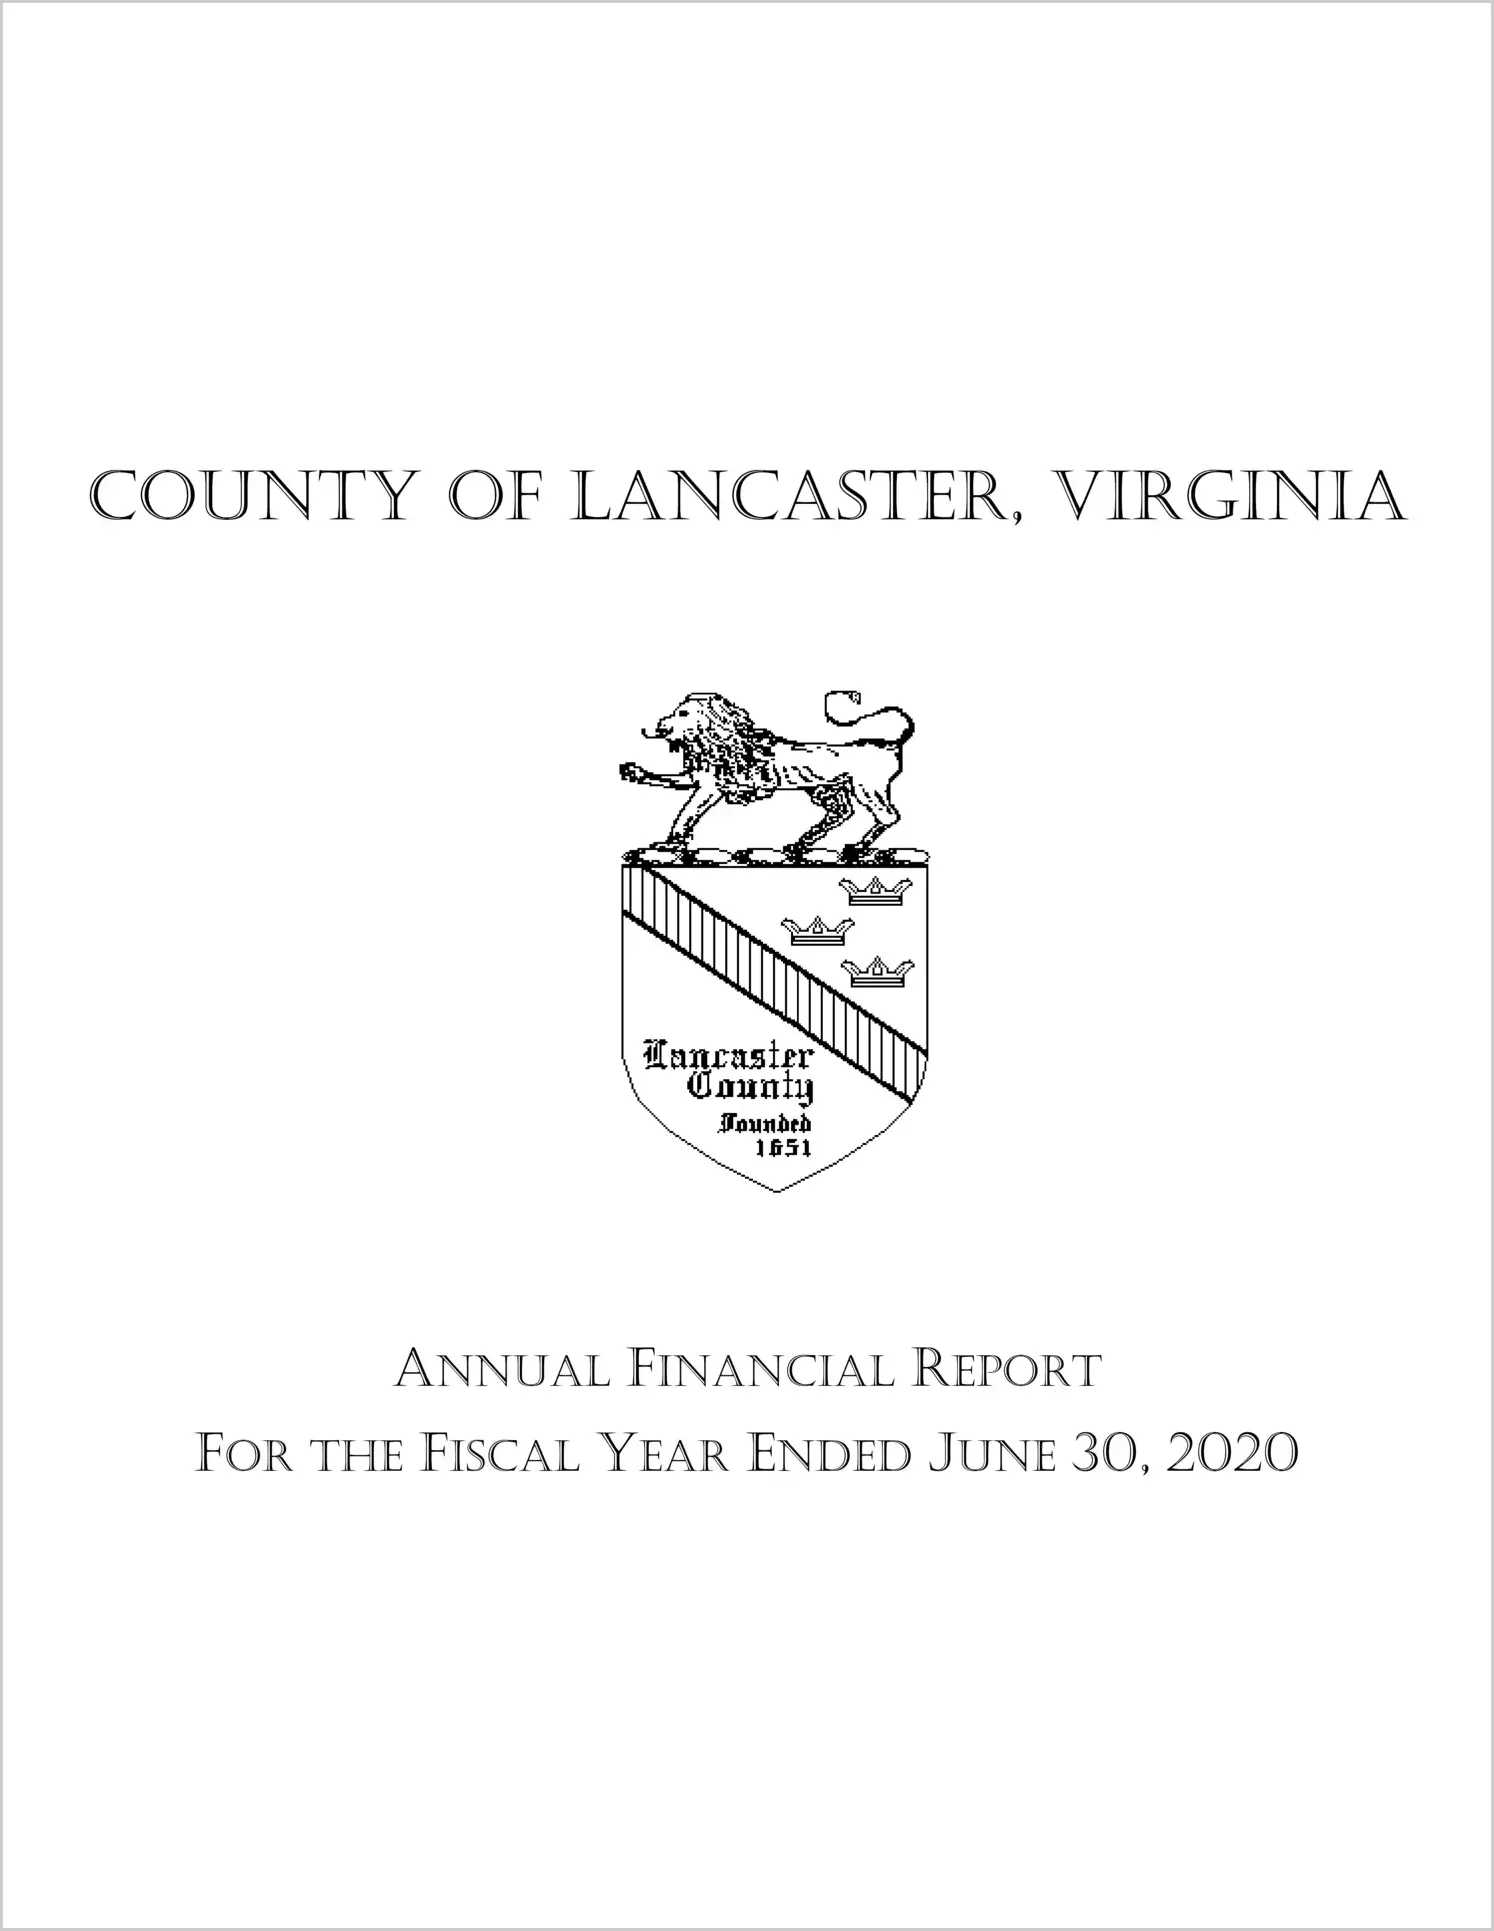 2020 Annual Financial Report for County of Lancaster